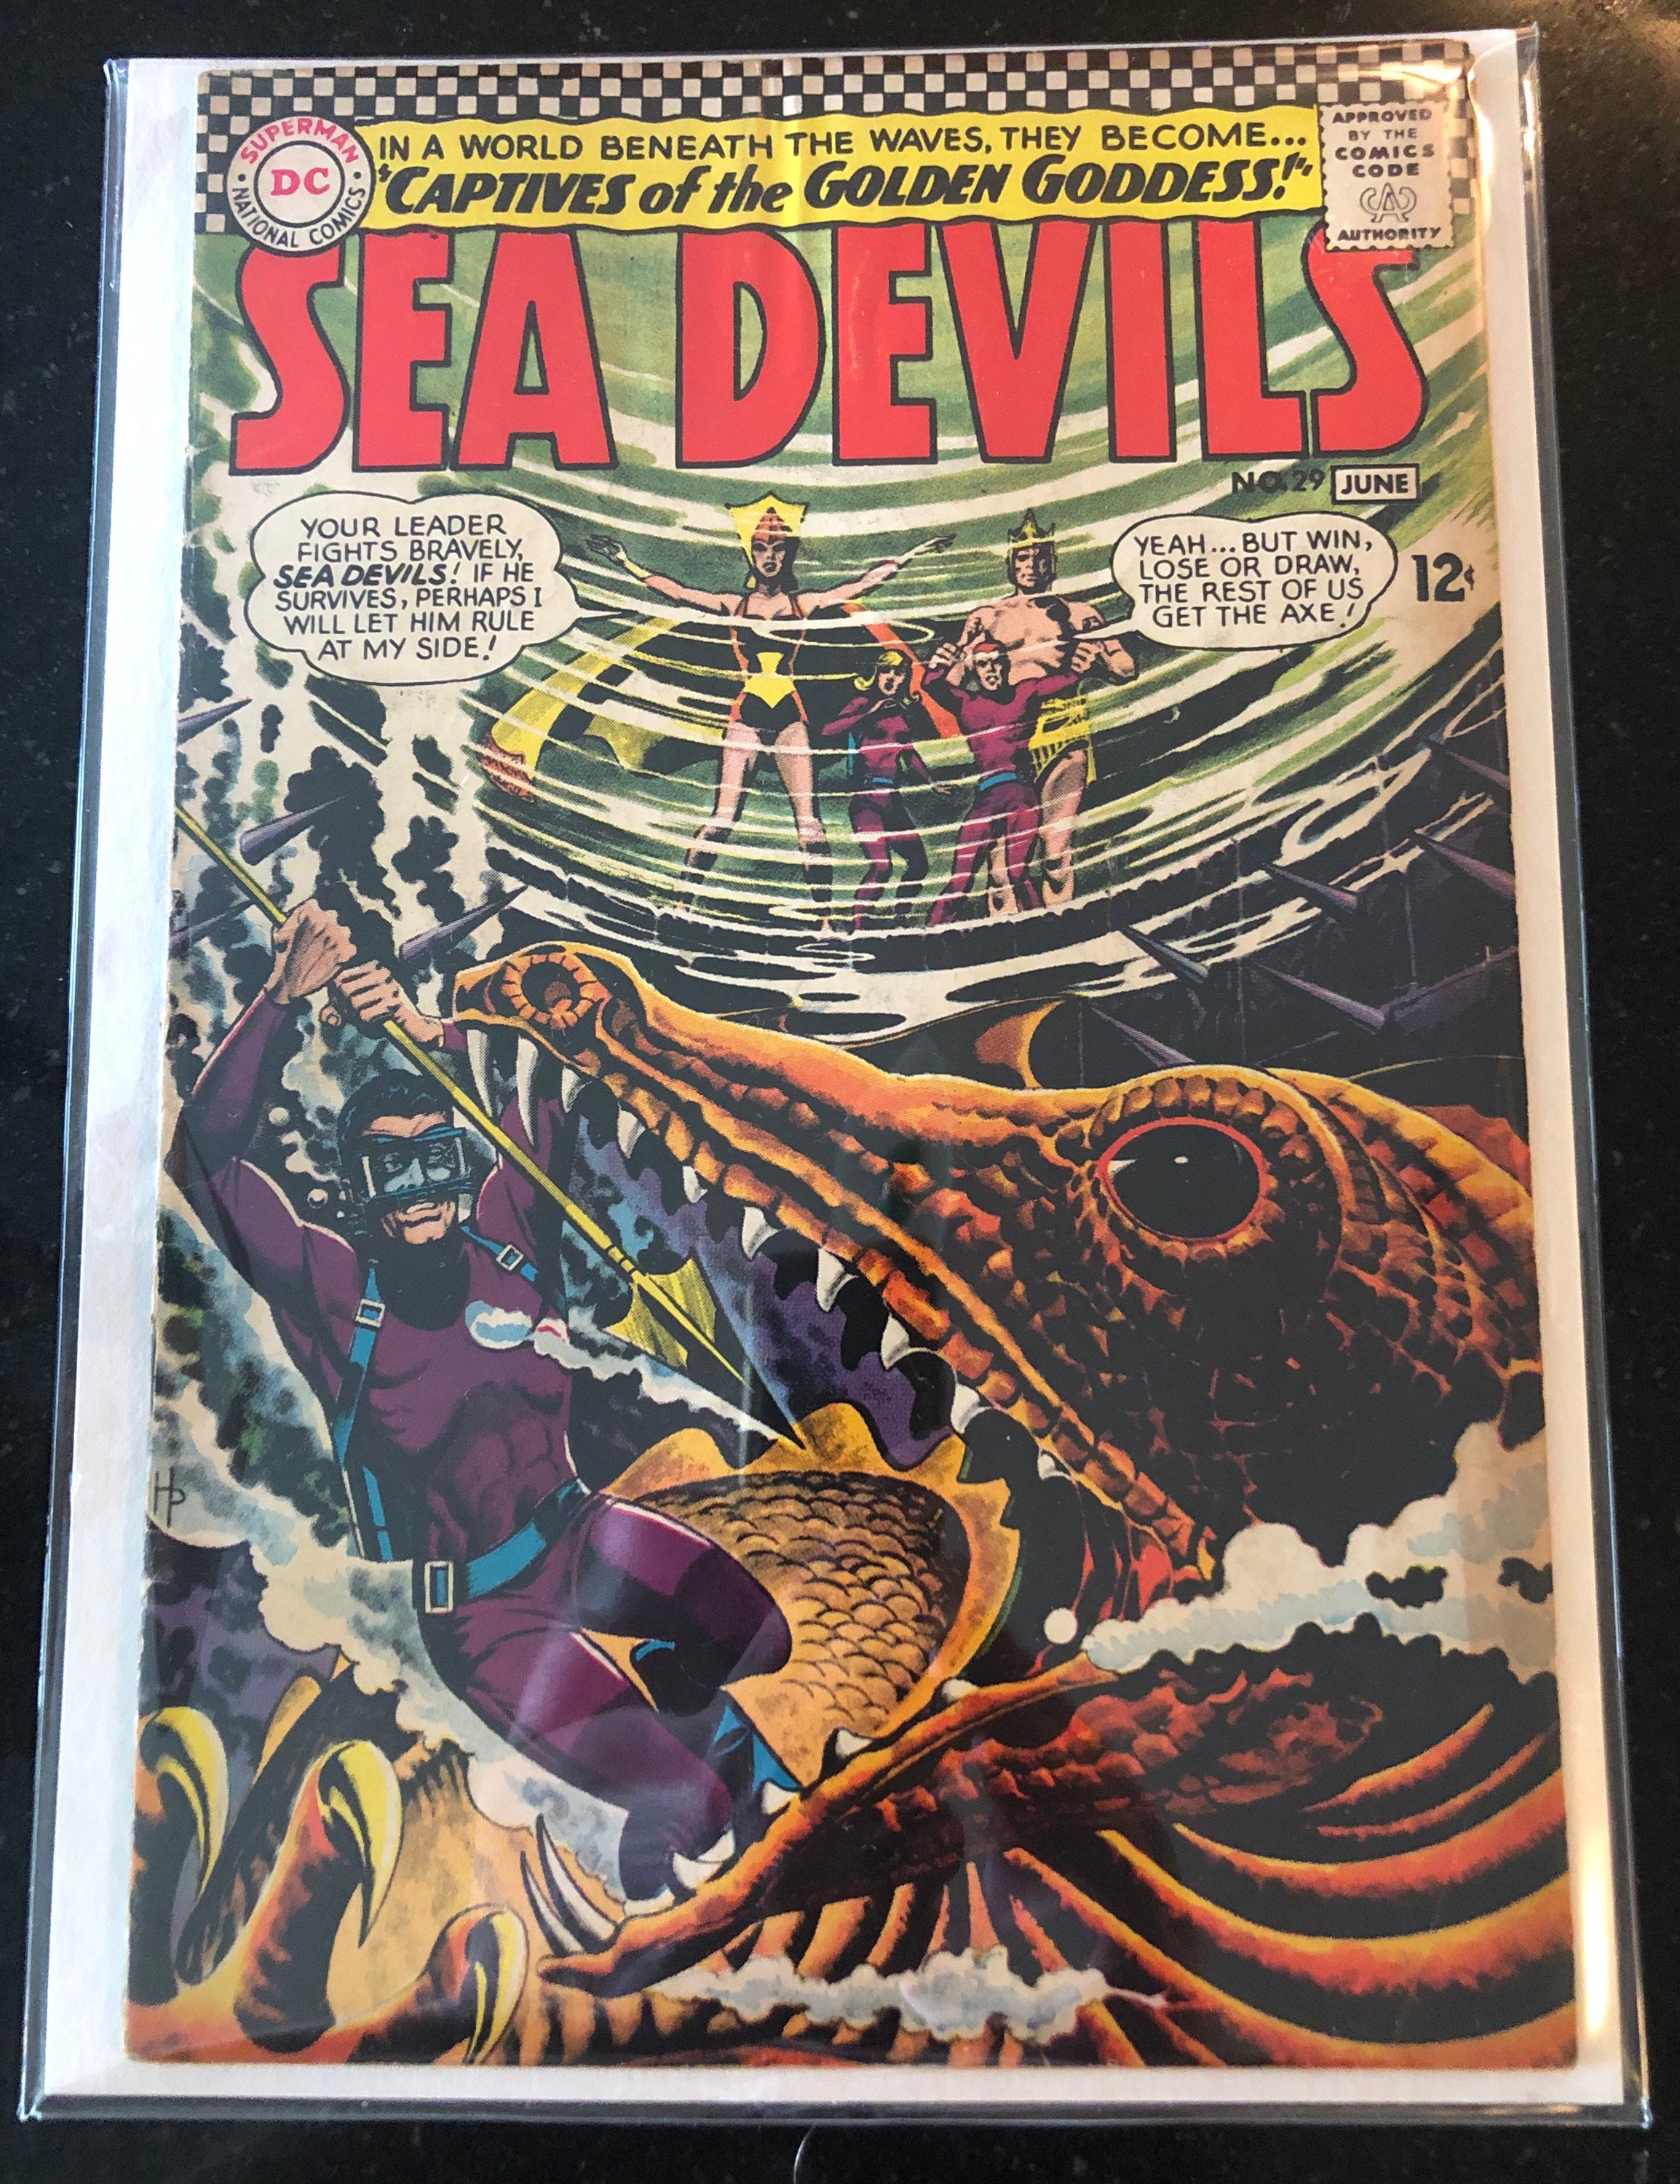 Lot - A group of DC Sea Devils and Showcase comics